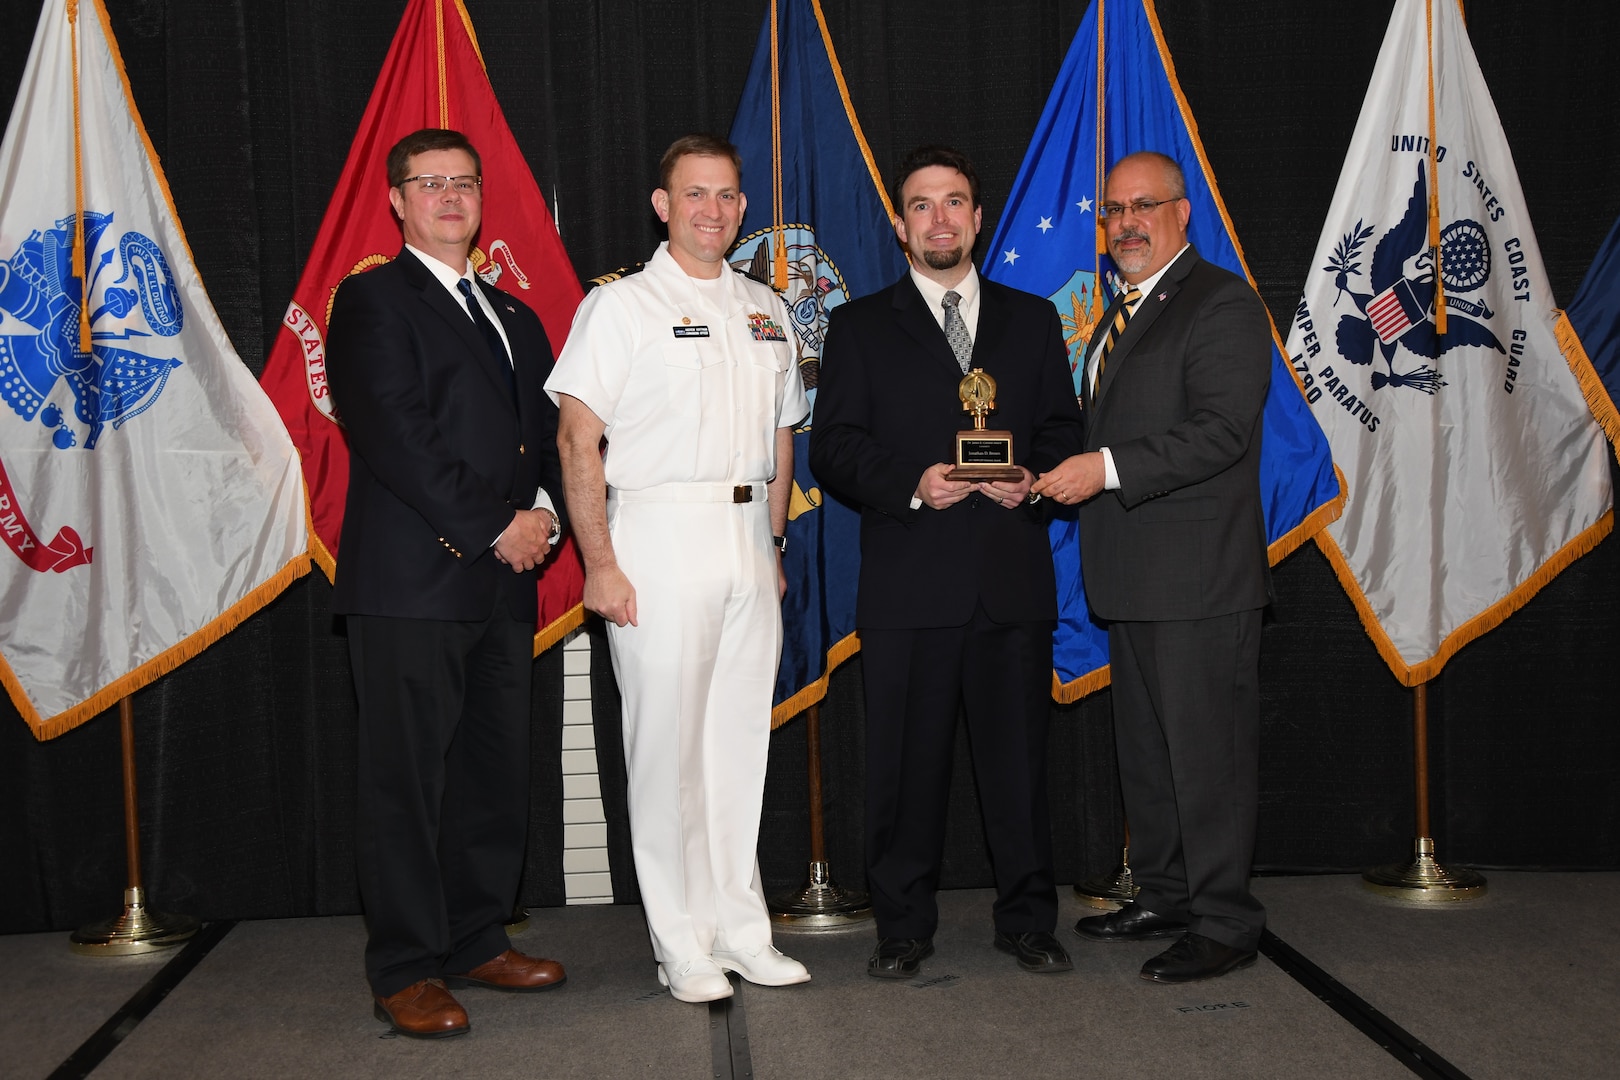 IMAGE: Jonathan Brown is presented the Dr. James Colvard Award at Naval Surface Warfare Center Dahlgren Division's annual awards ceremony, Apr. 26 at the Fredericksburg Expo and Conference Center.